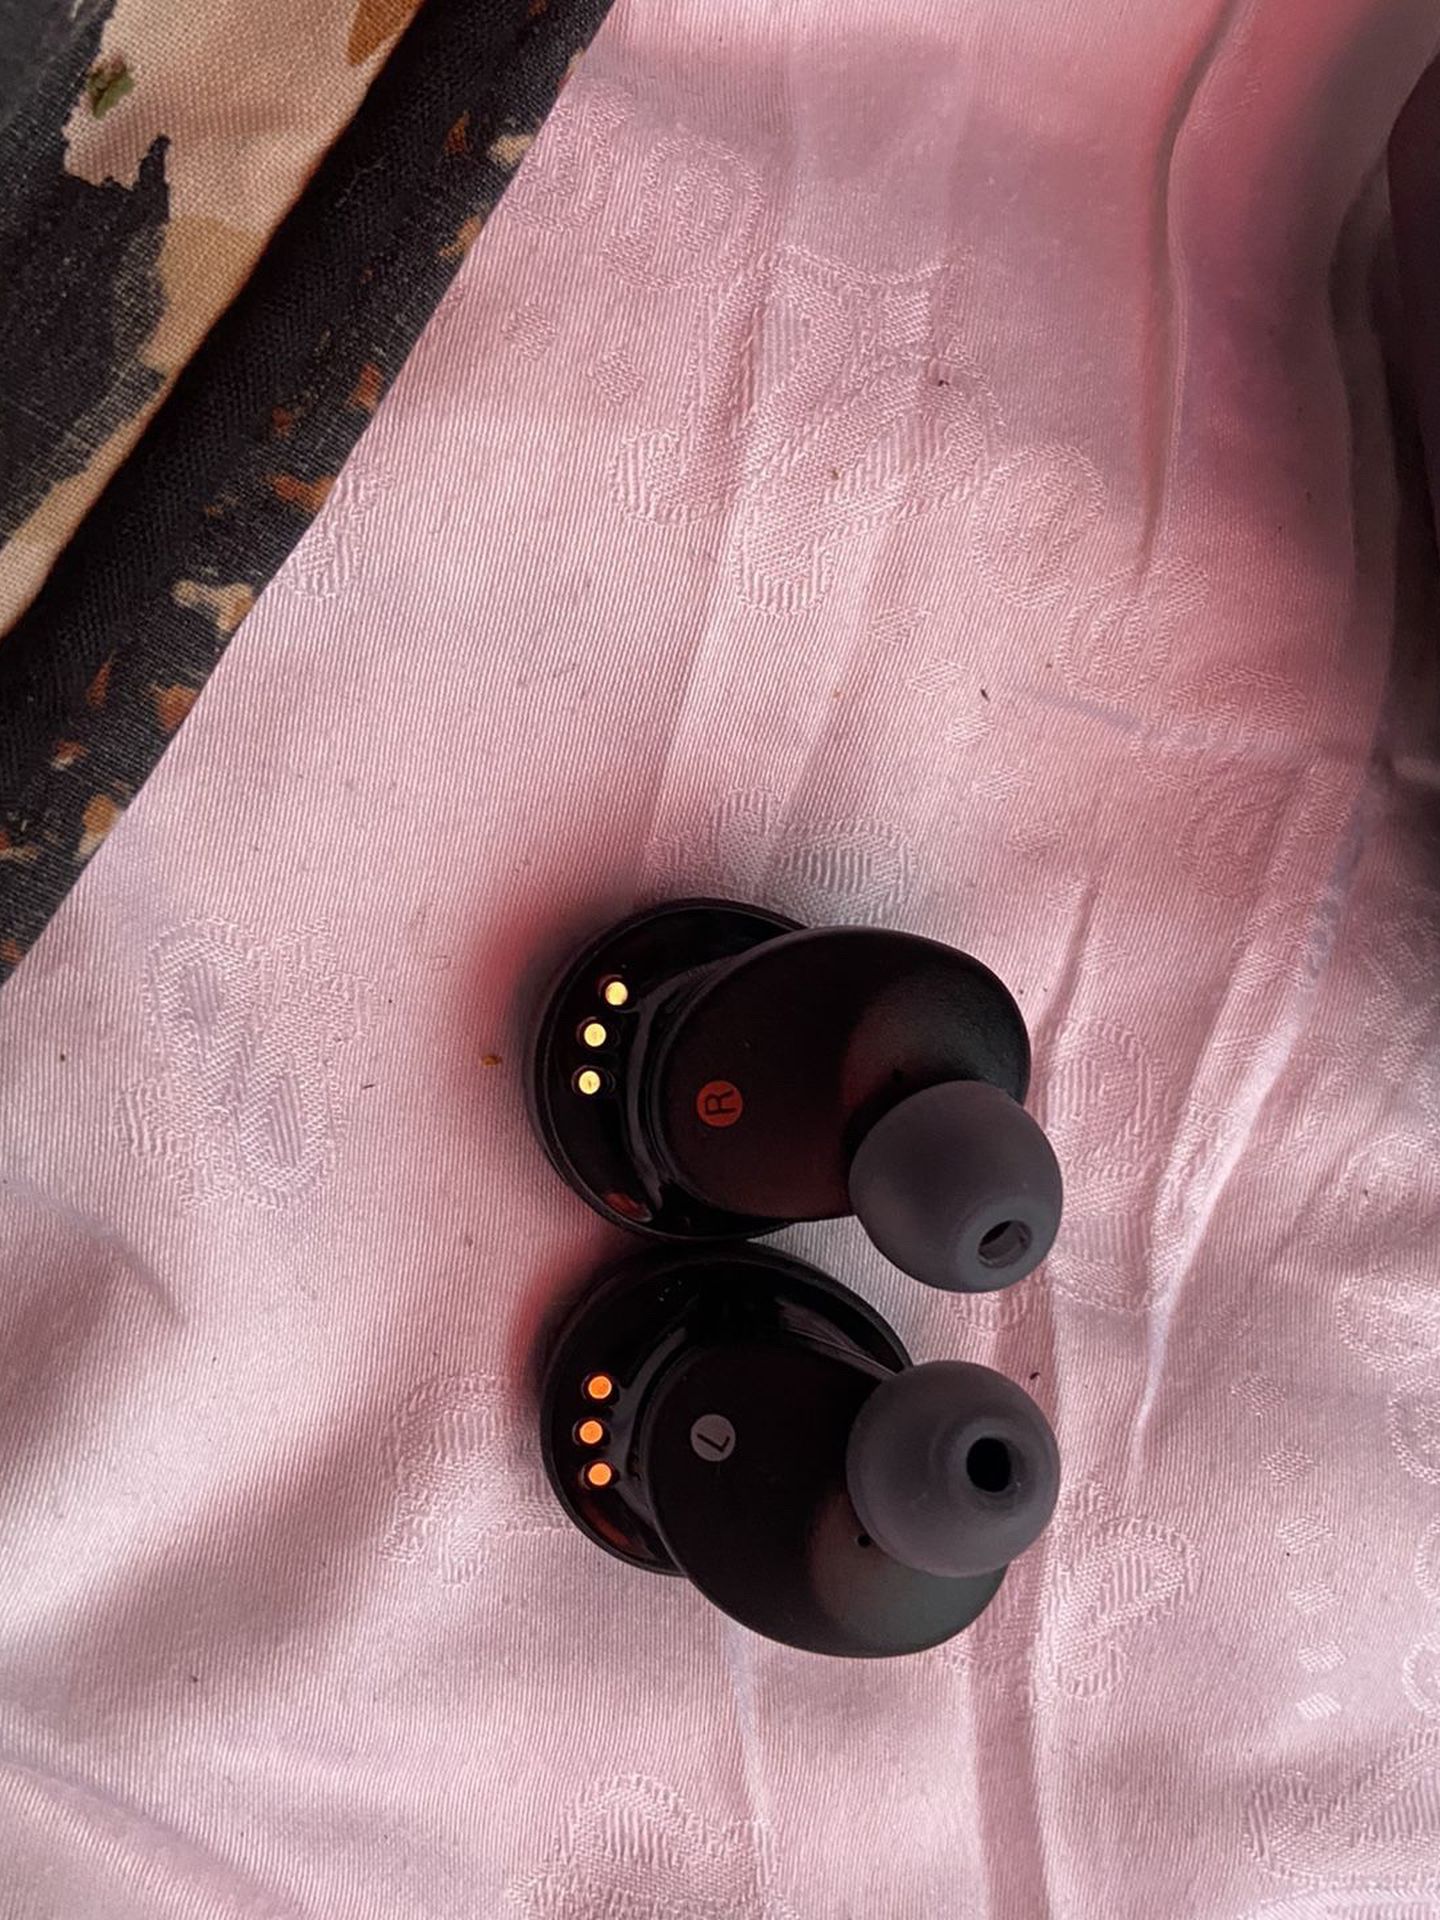 Sony True wireless earbuds E353418. Everything is burning and works very good